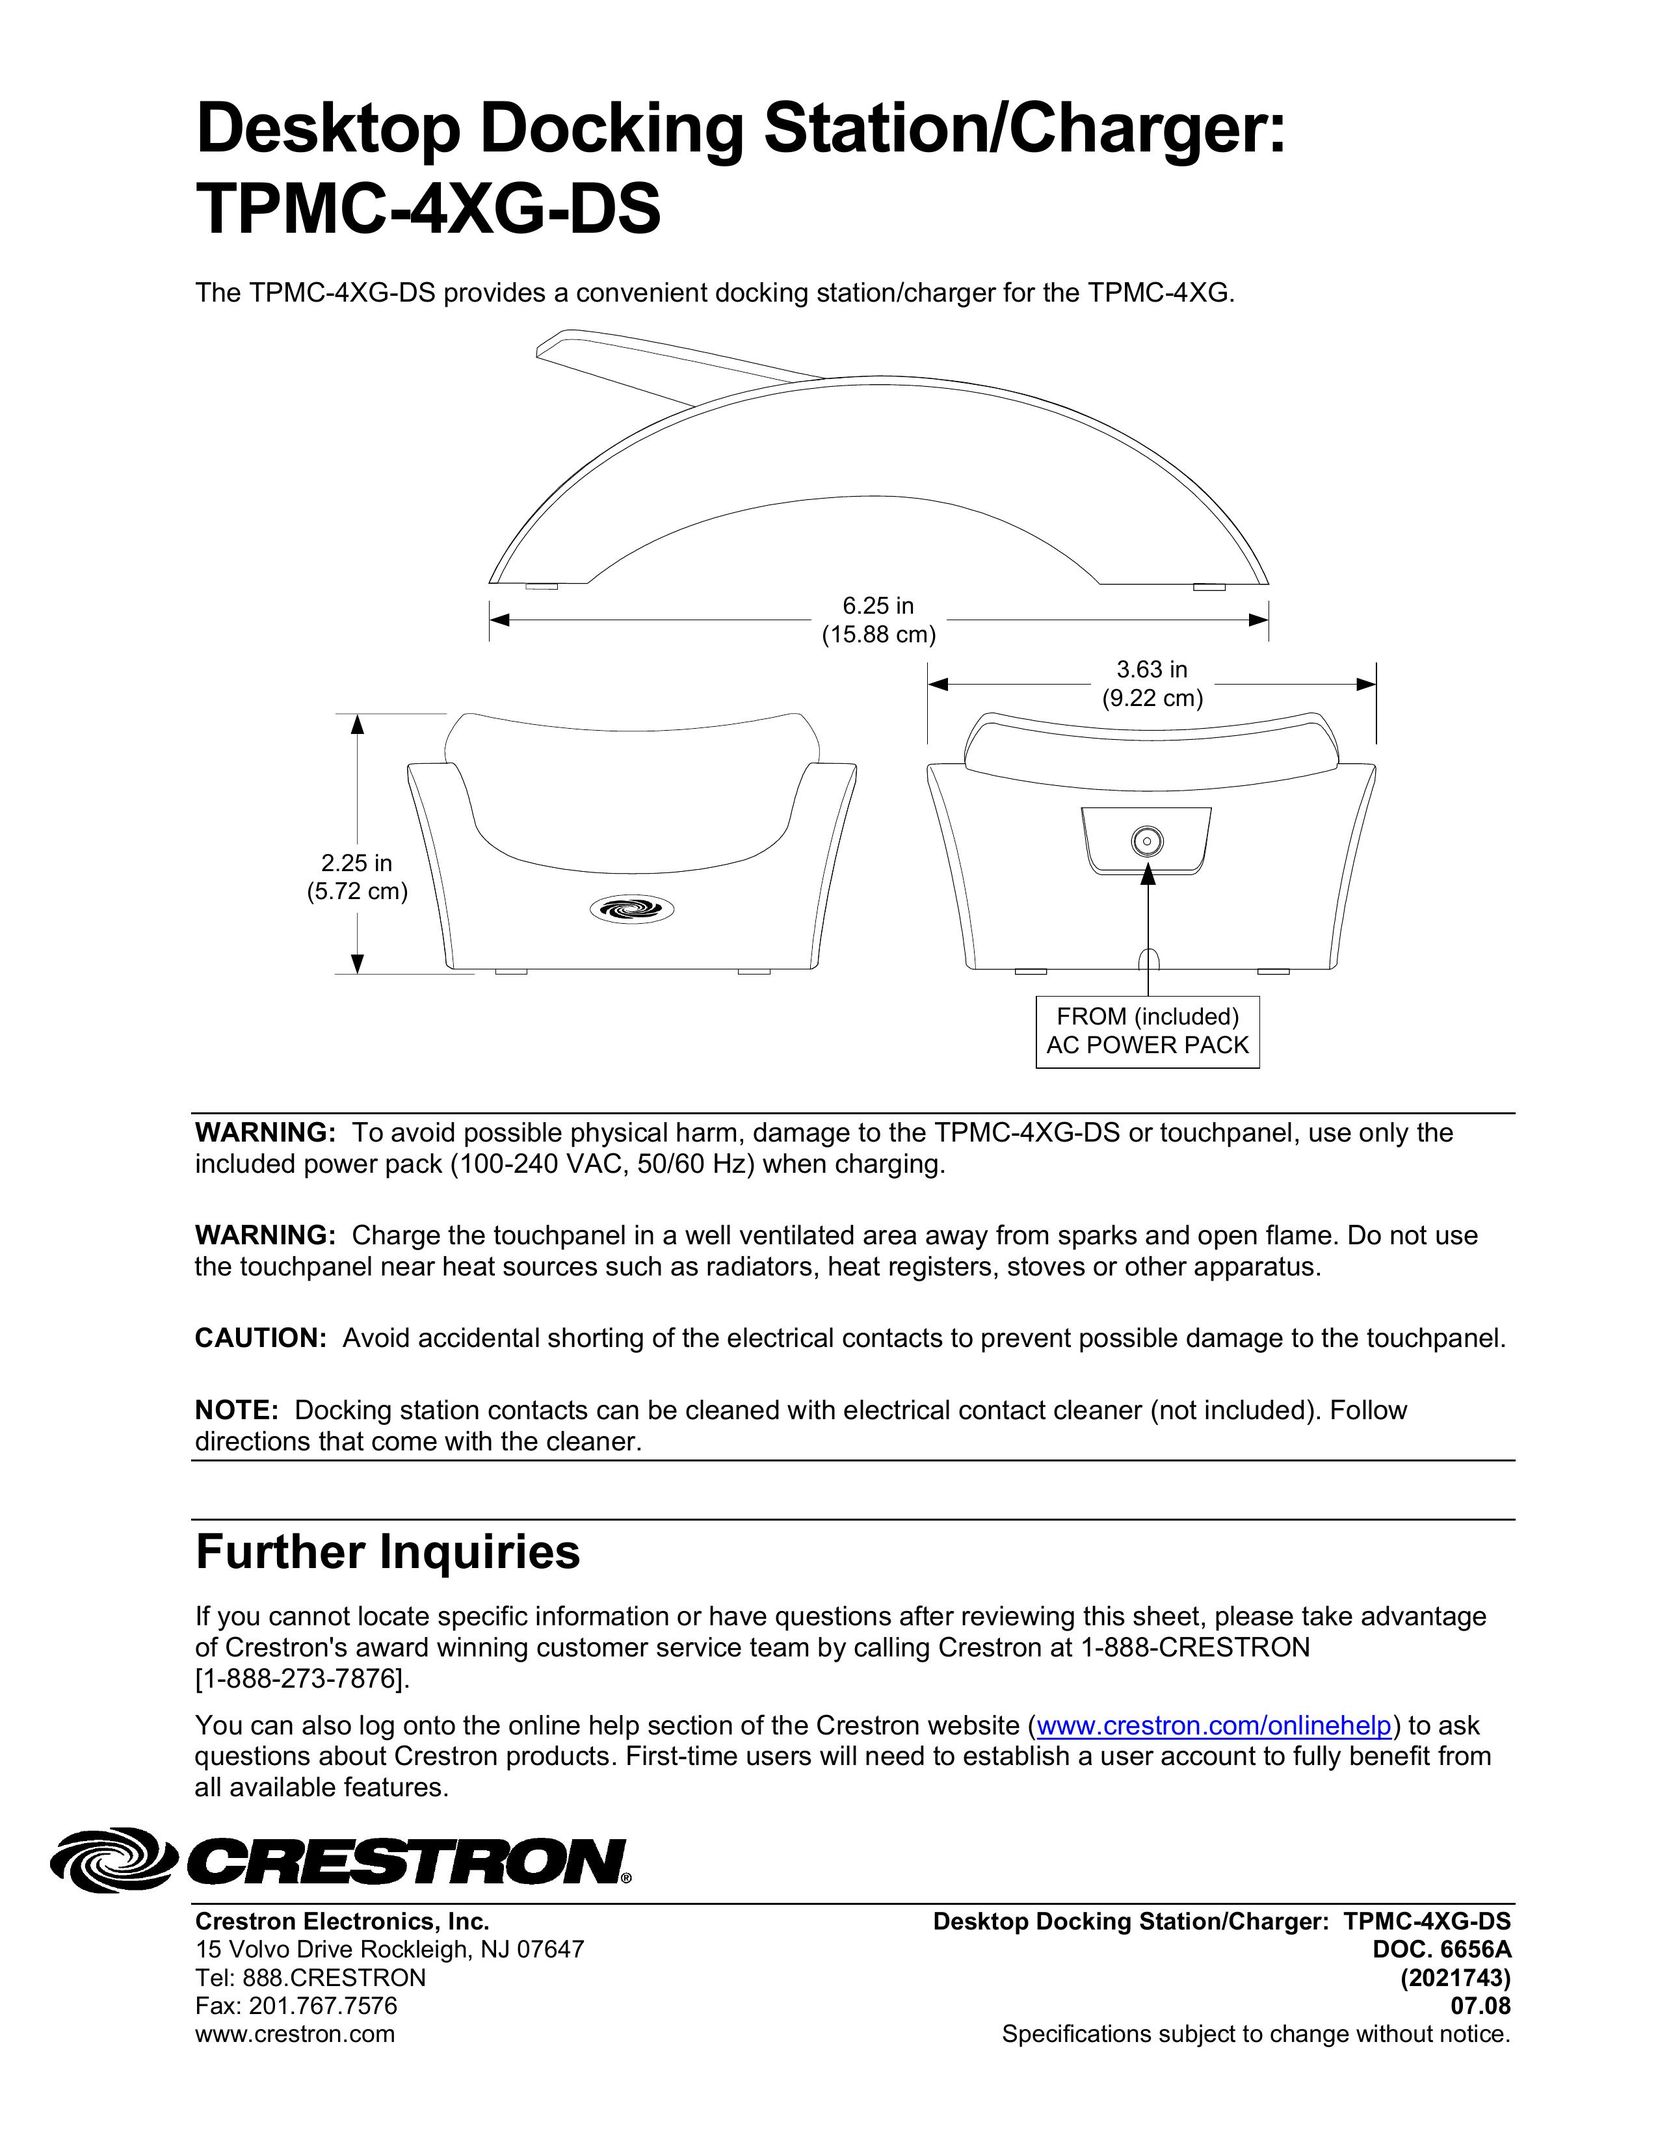 Crestron electronic TPMC-4XG-DS MP3 Docking Station User Manual